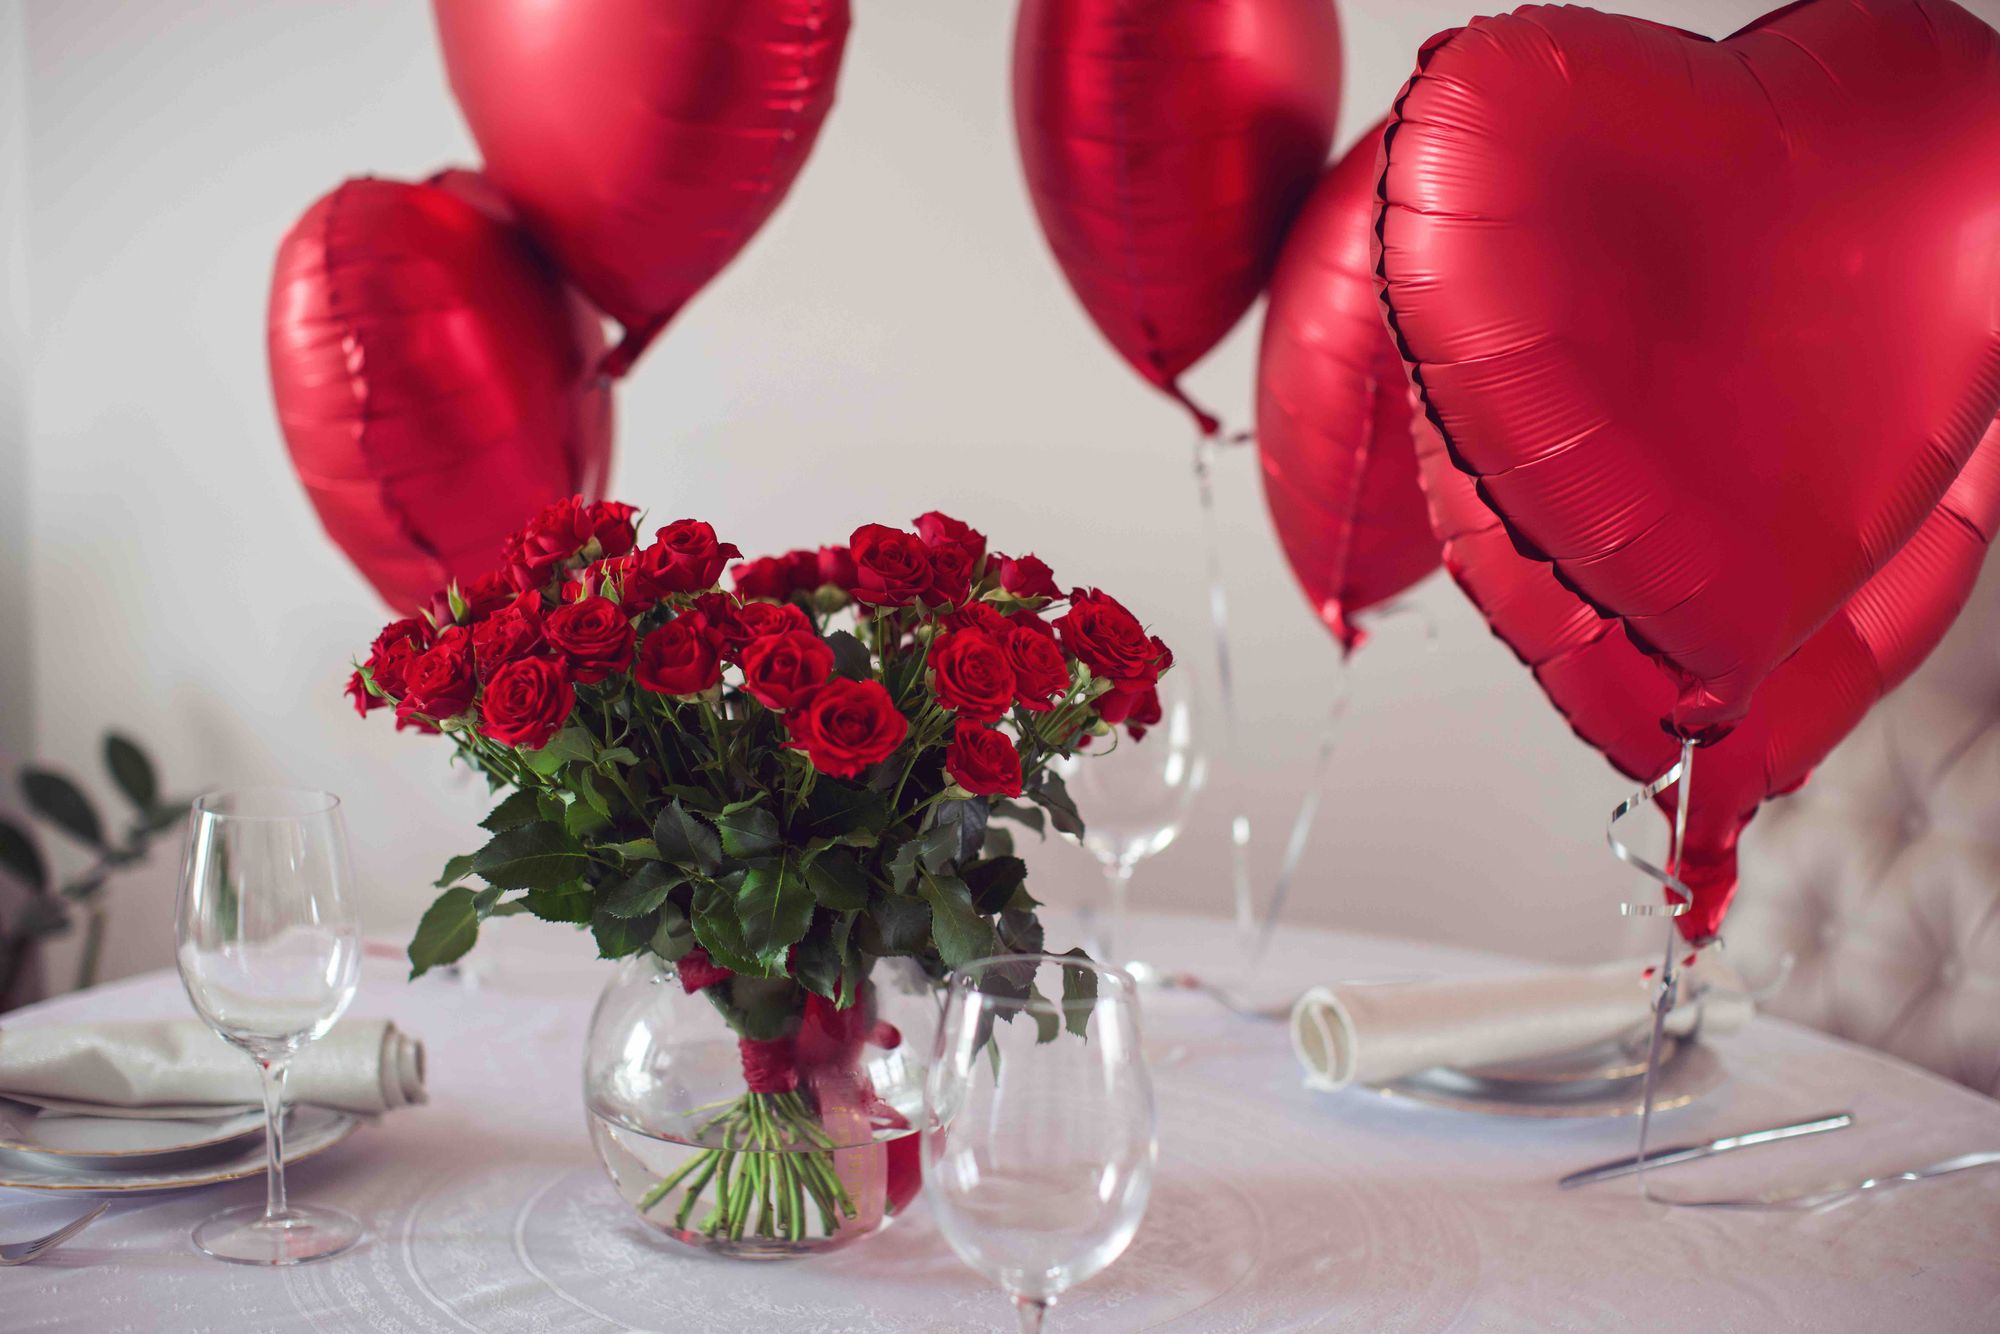 Table with a white tablecloth, red roses, and heart shaped balloons.